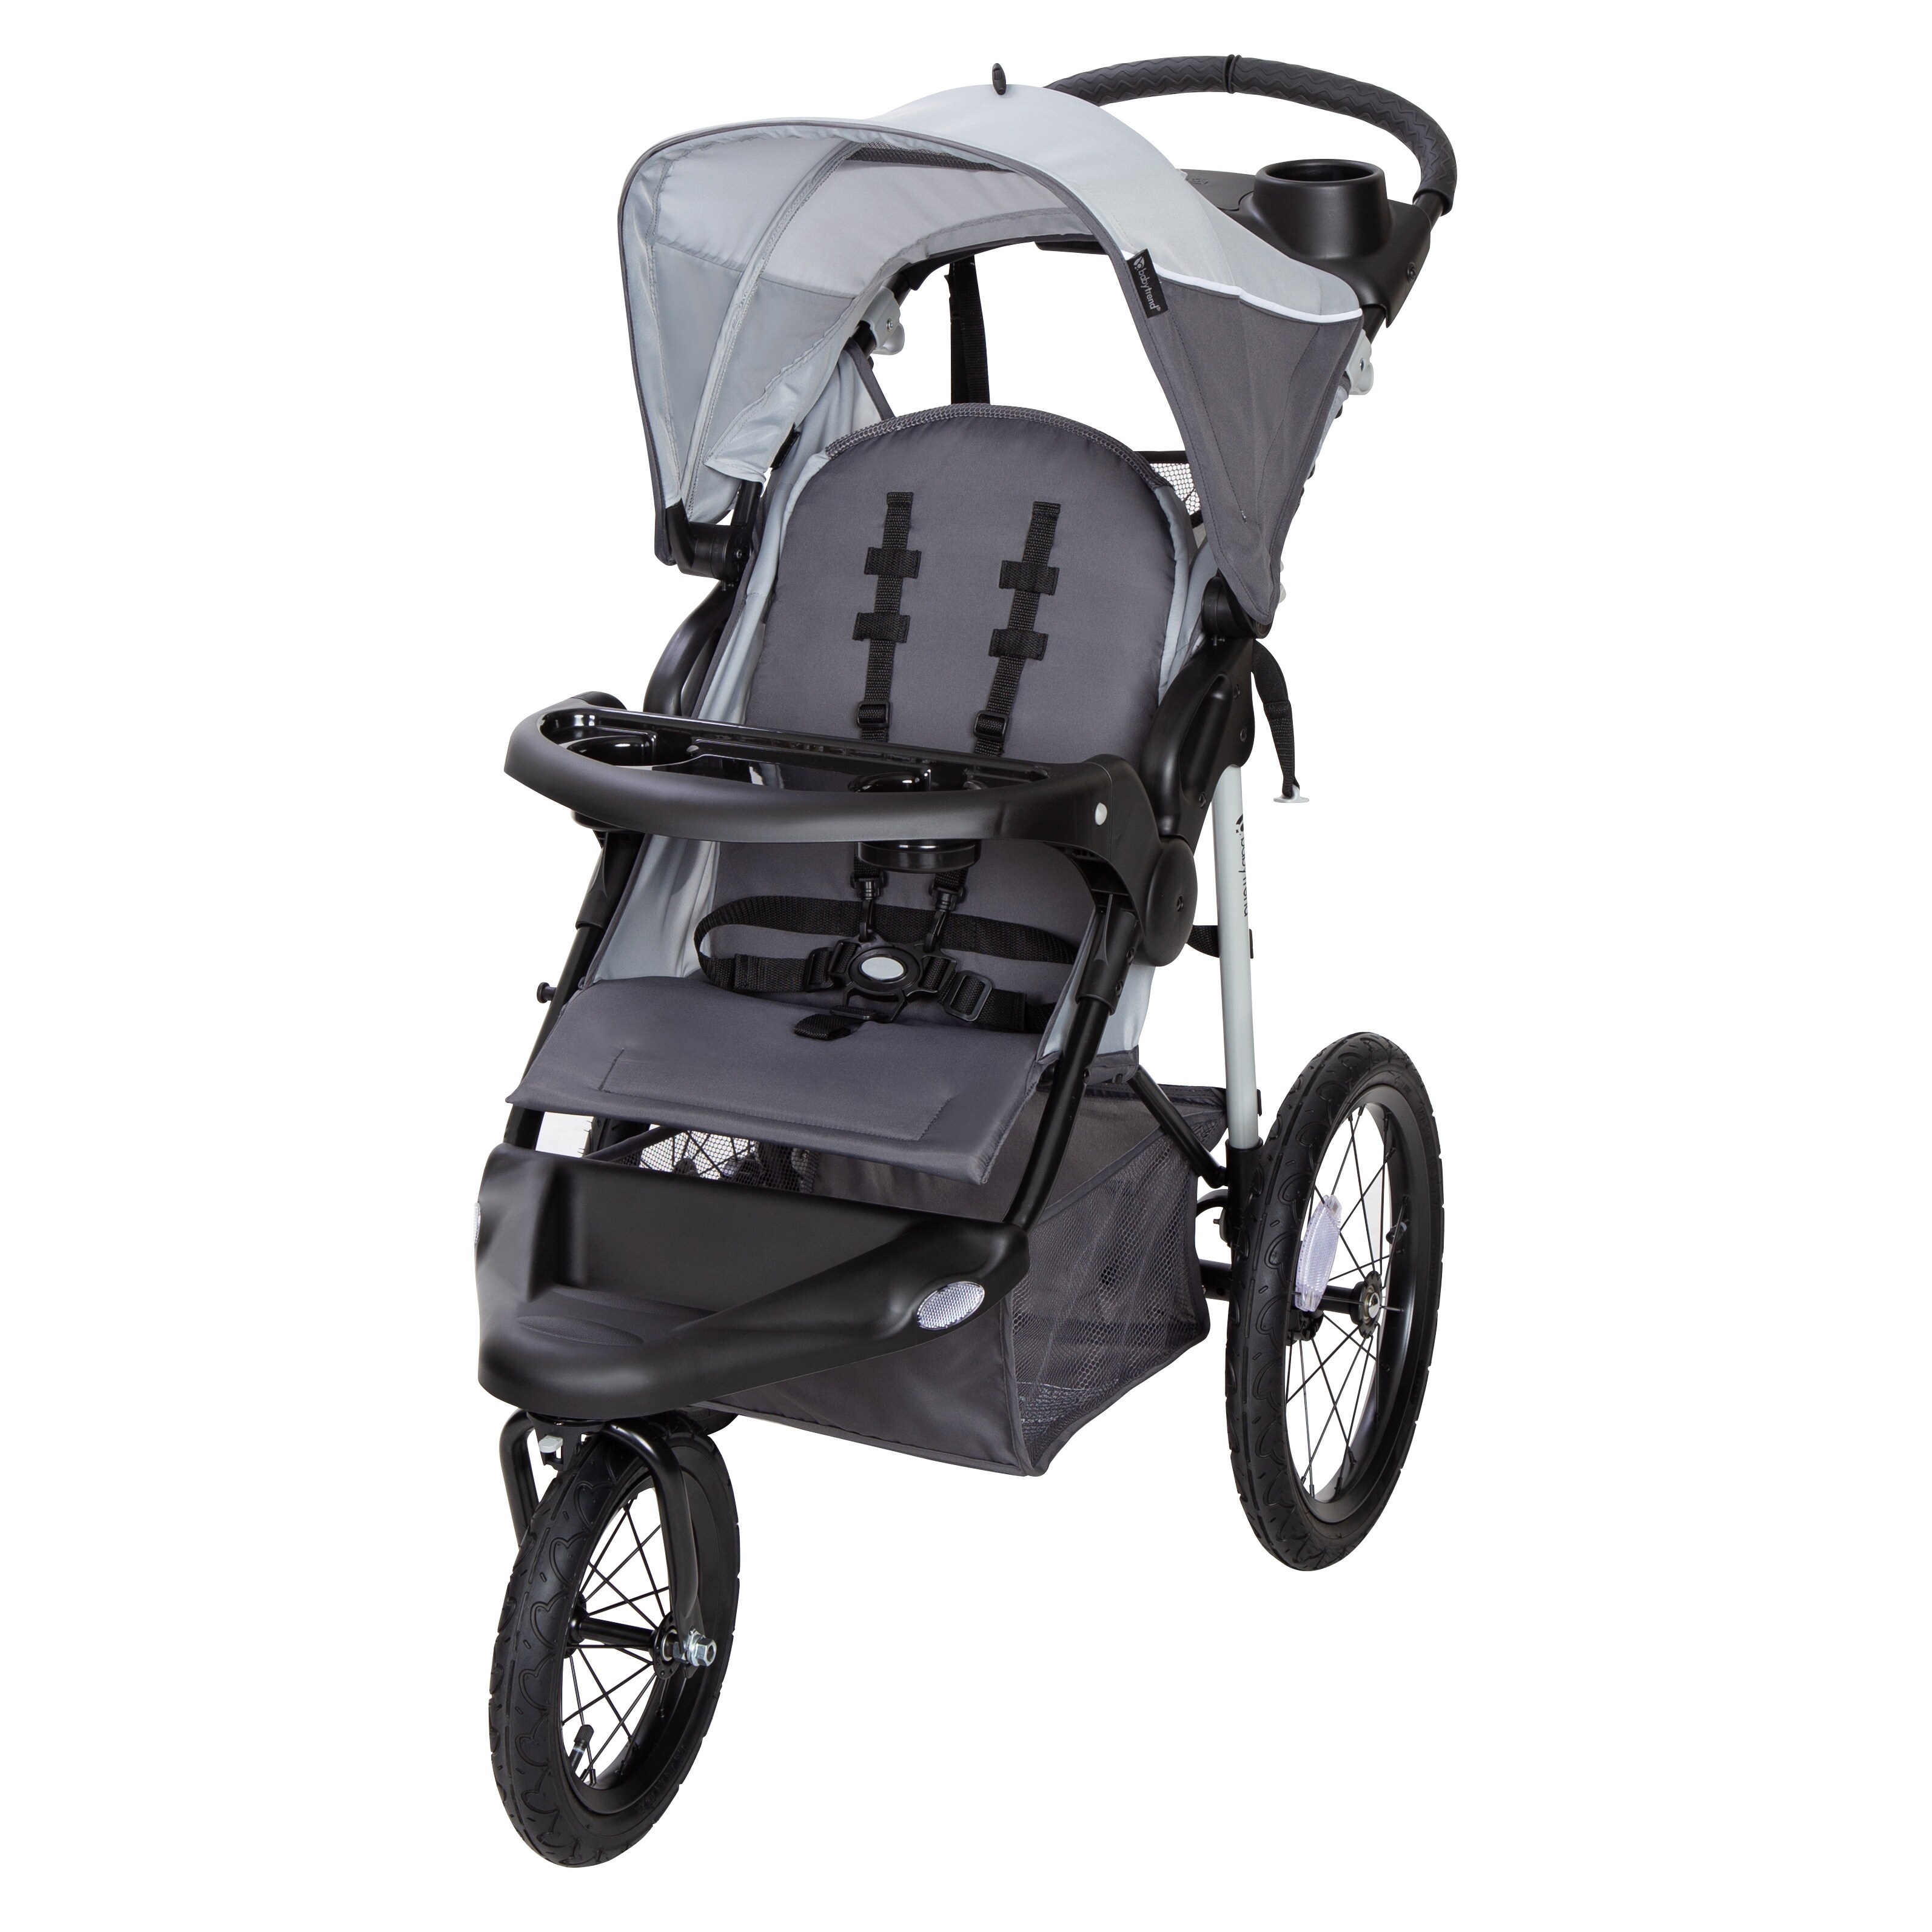 baby trend stroller pink and grey